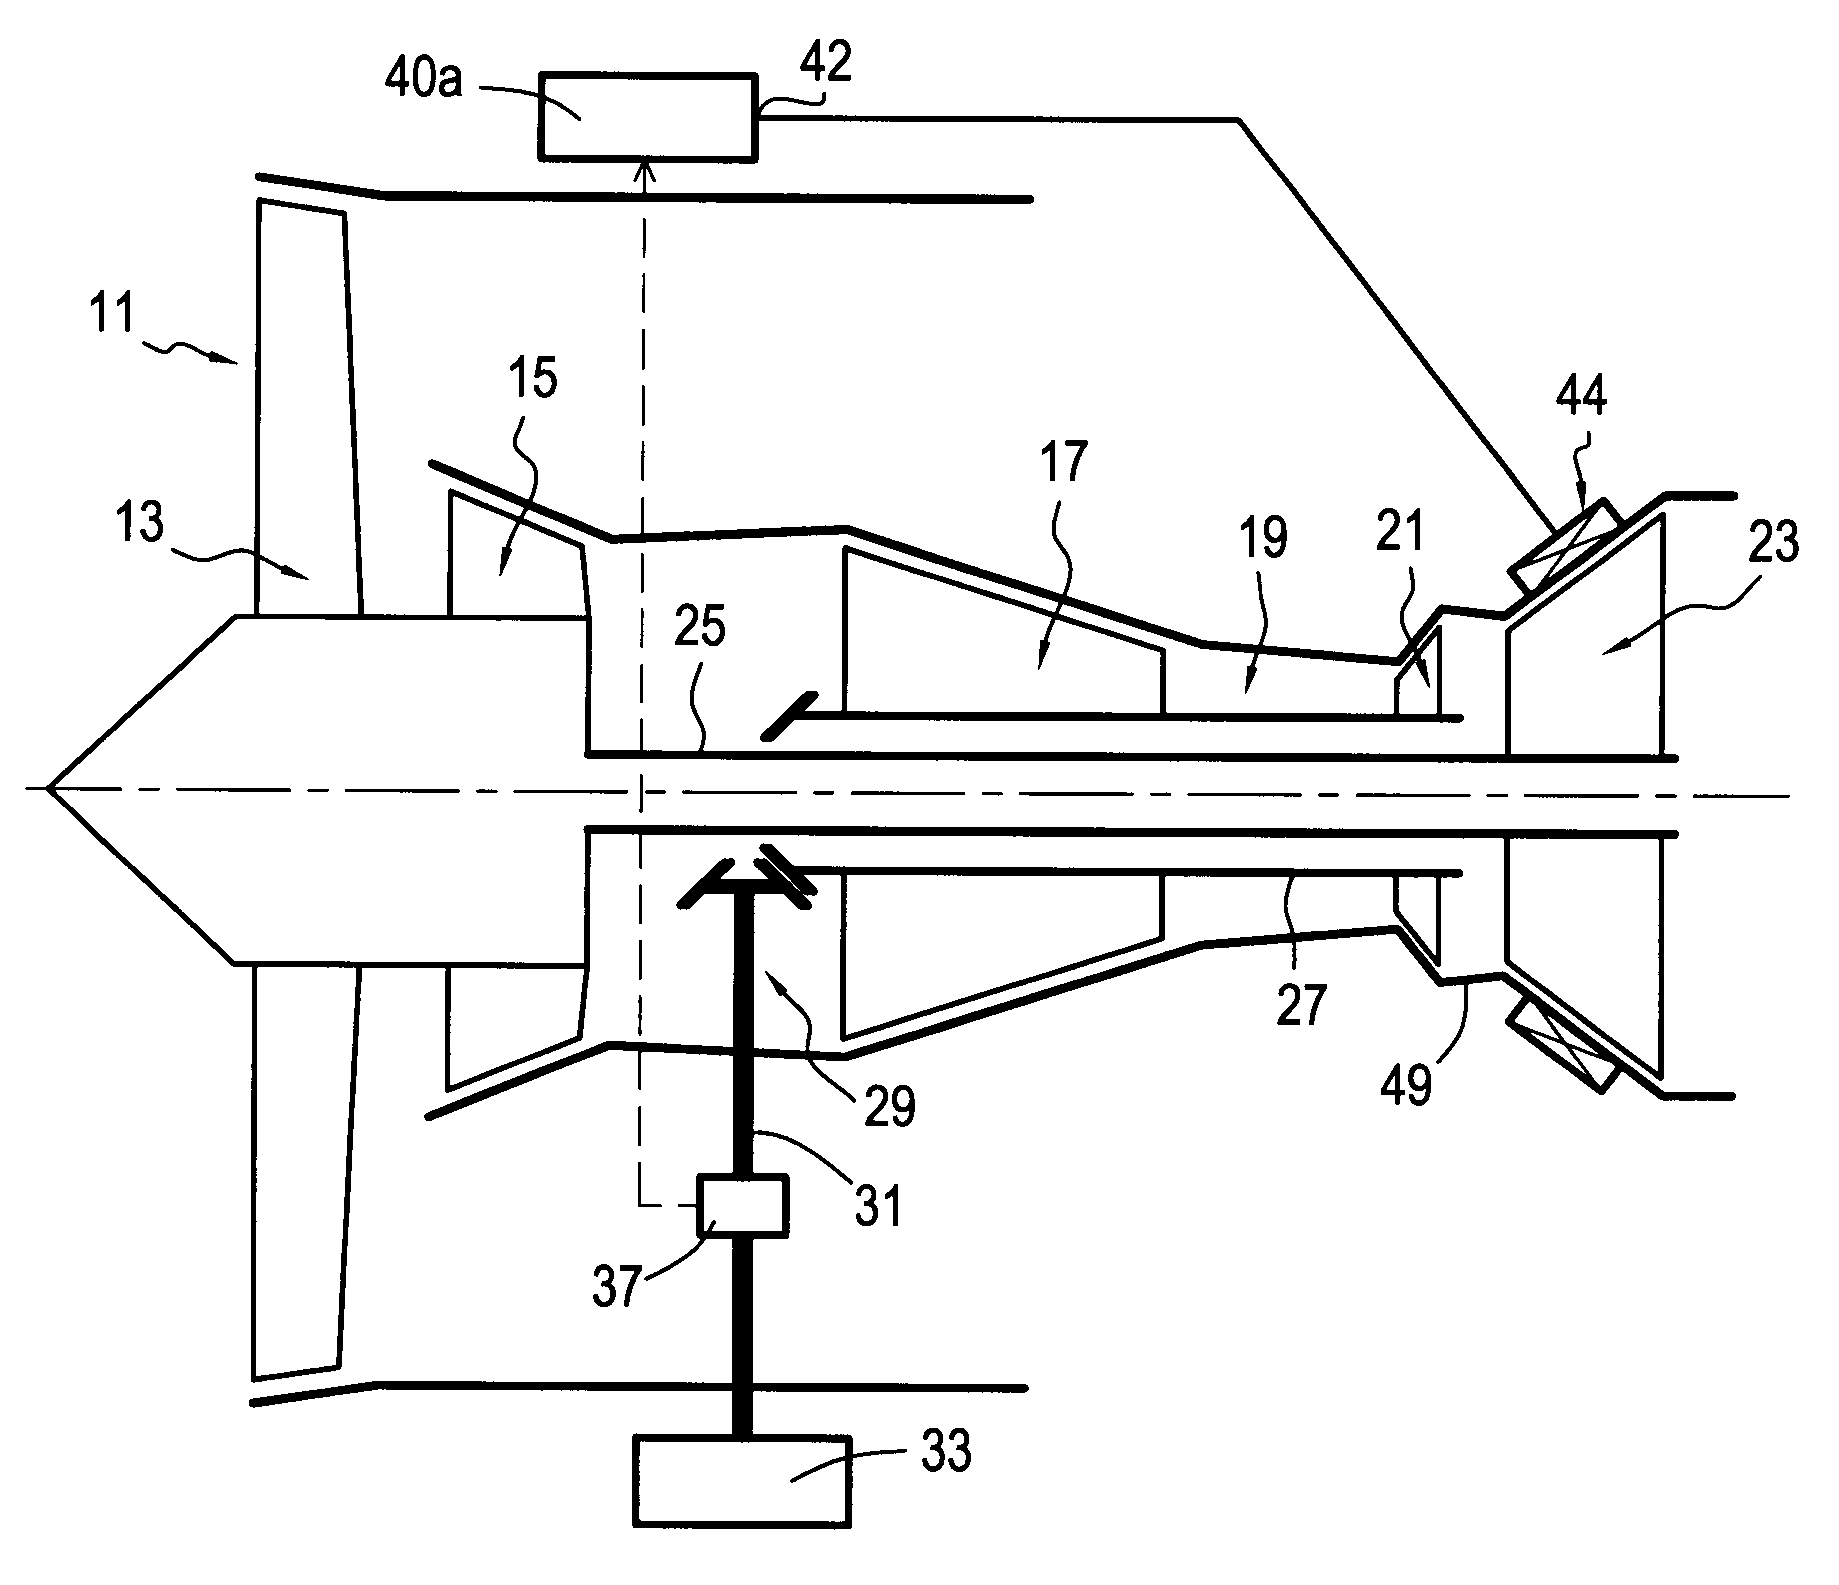 Method of taking off auxiliary power from an airplane turbojet, and a turbojet fitted to implement such a method